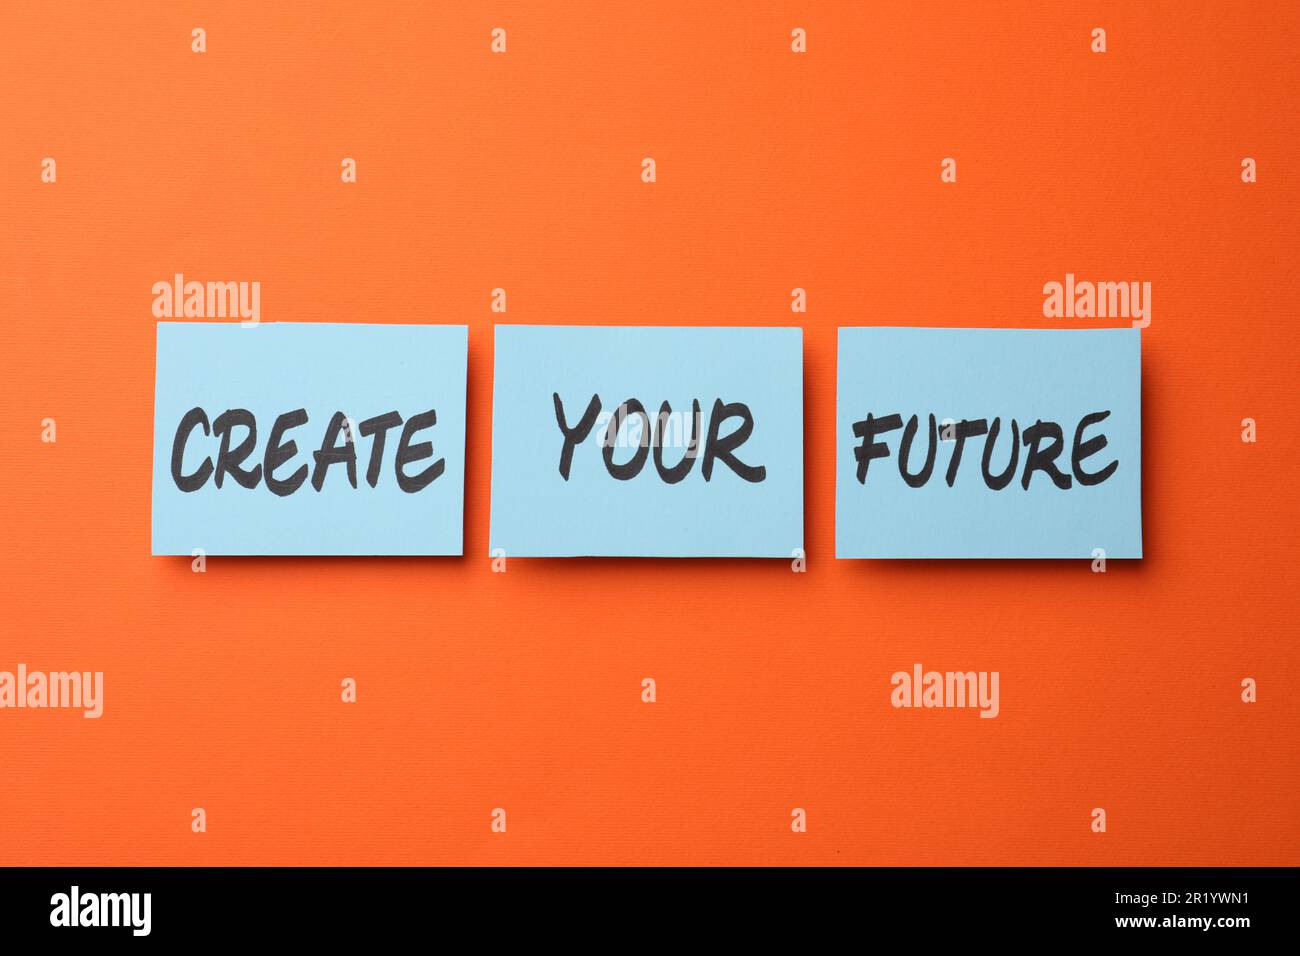 Motivational phrase Create Your Future made of sticky notes with words on orange background Stock Photo